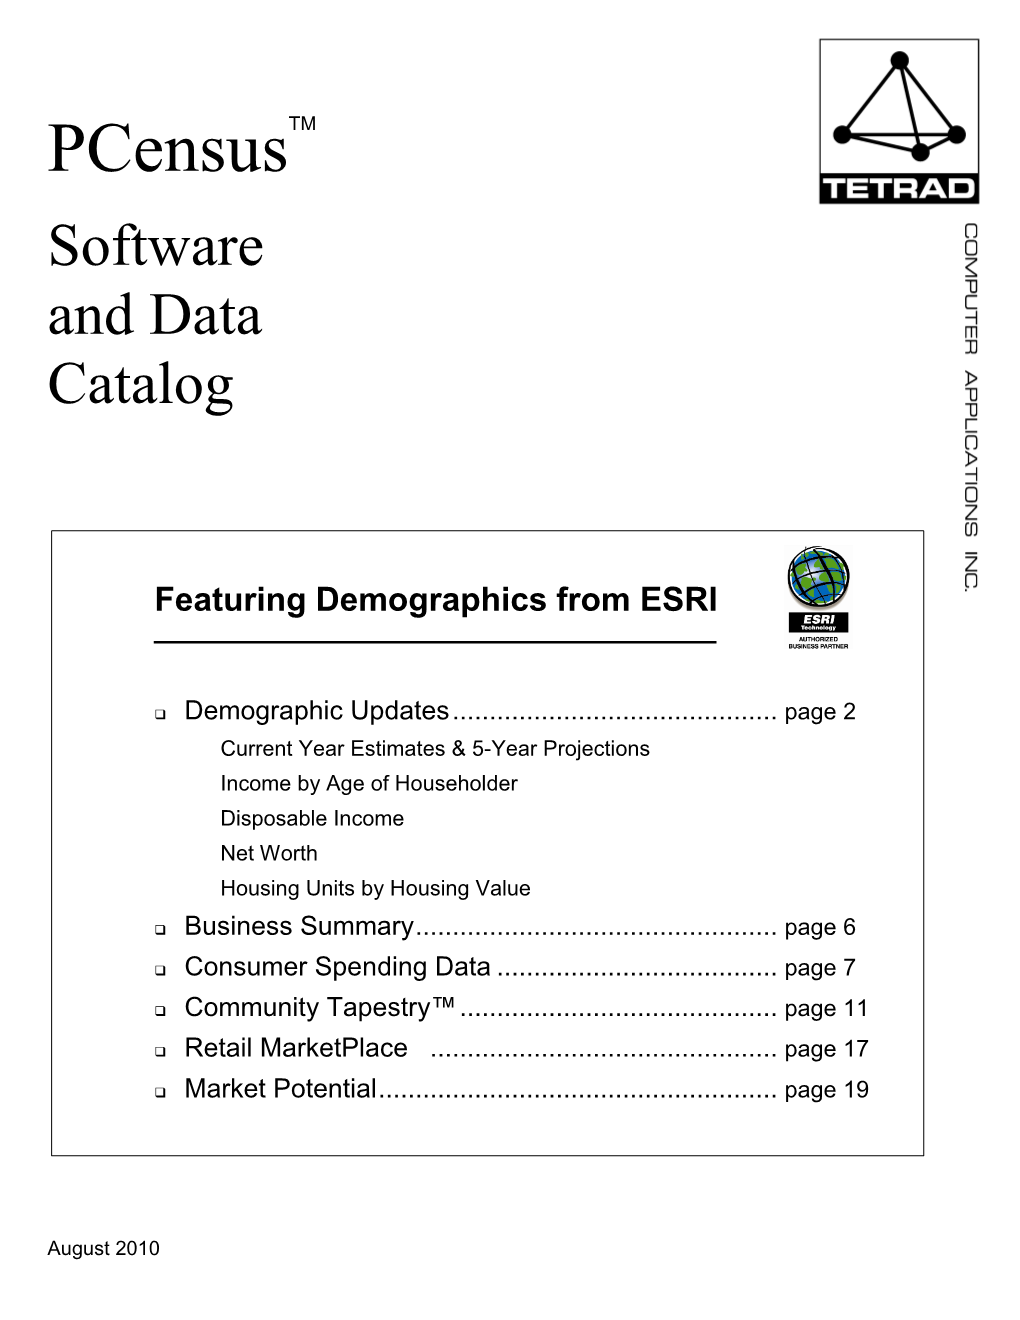 Featuring Demographics from ESRI